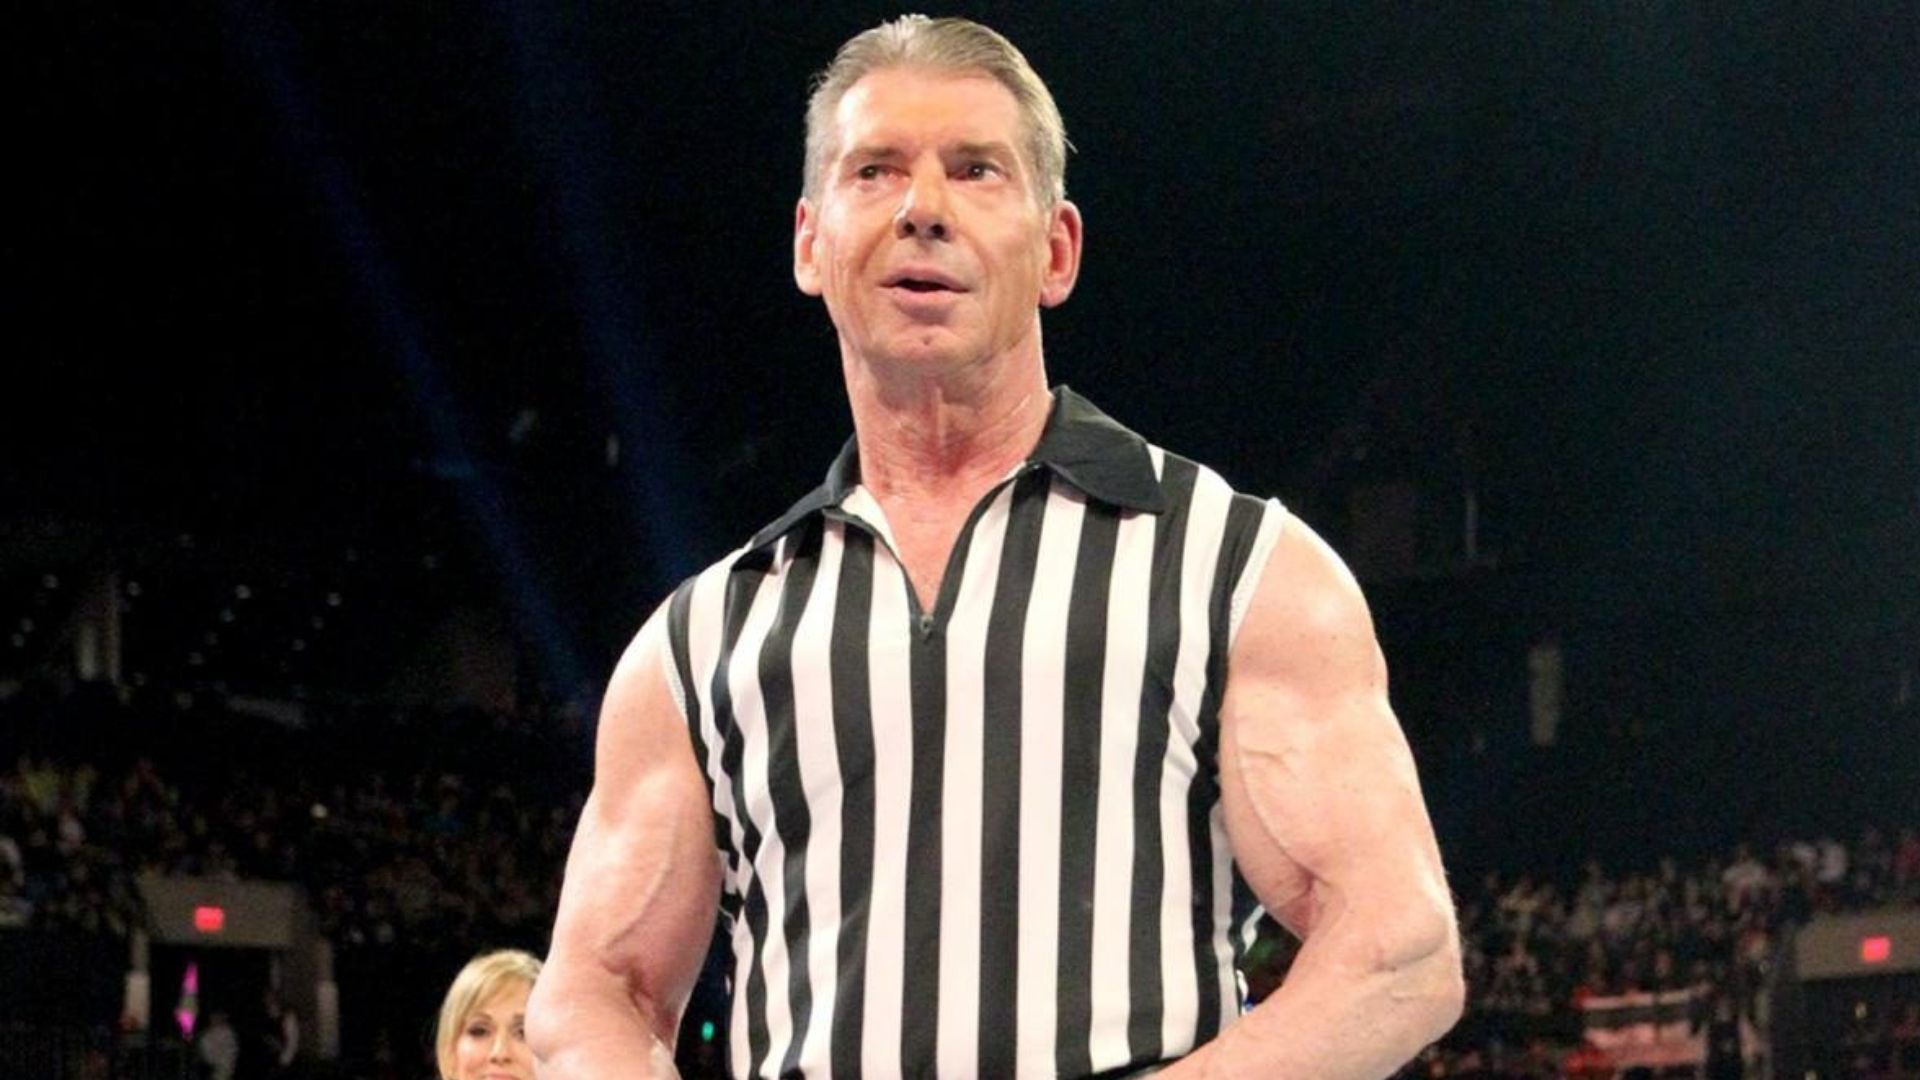 Vince McMahon as a special guest referee